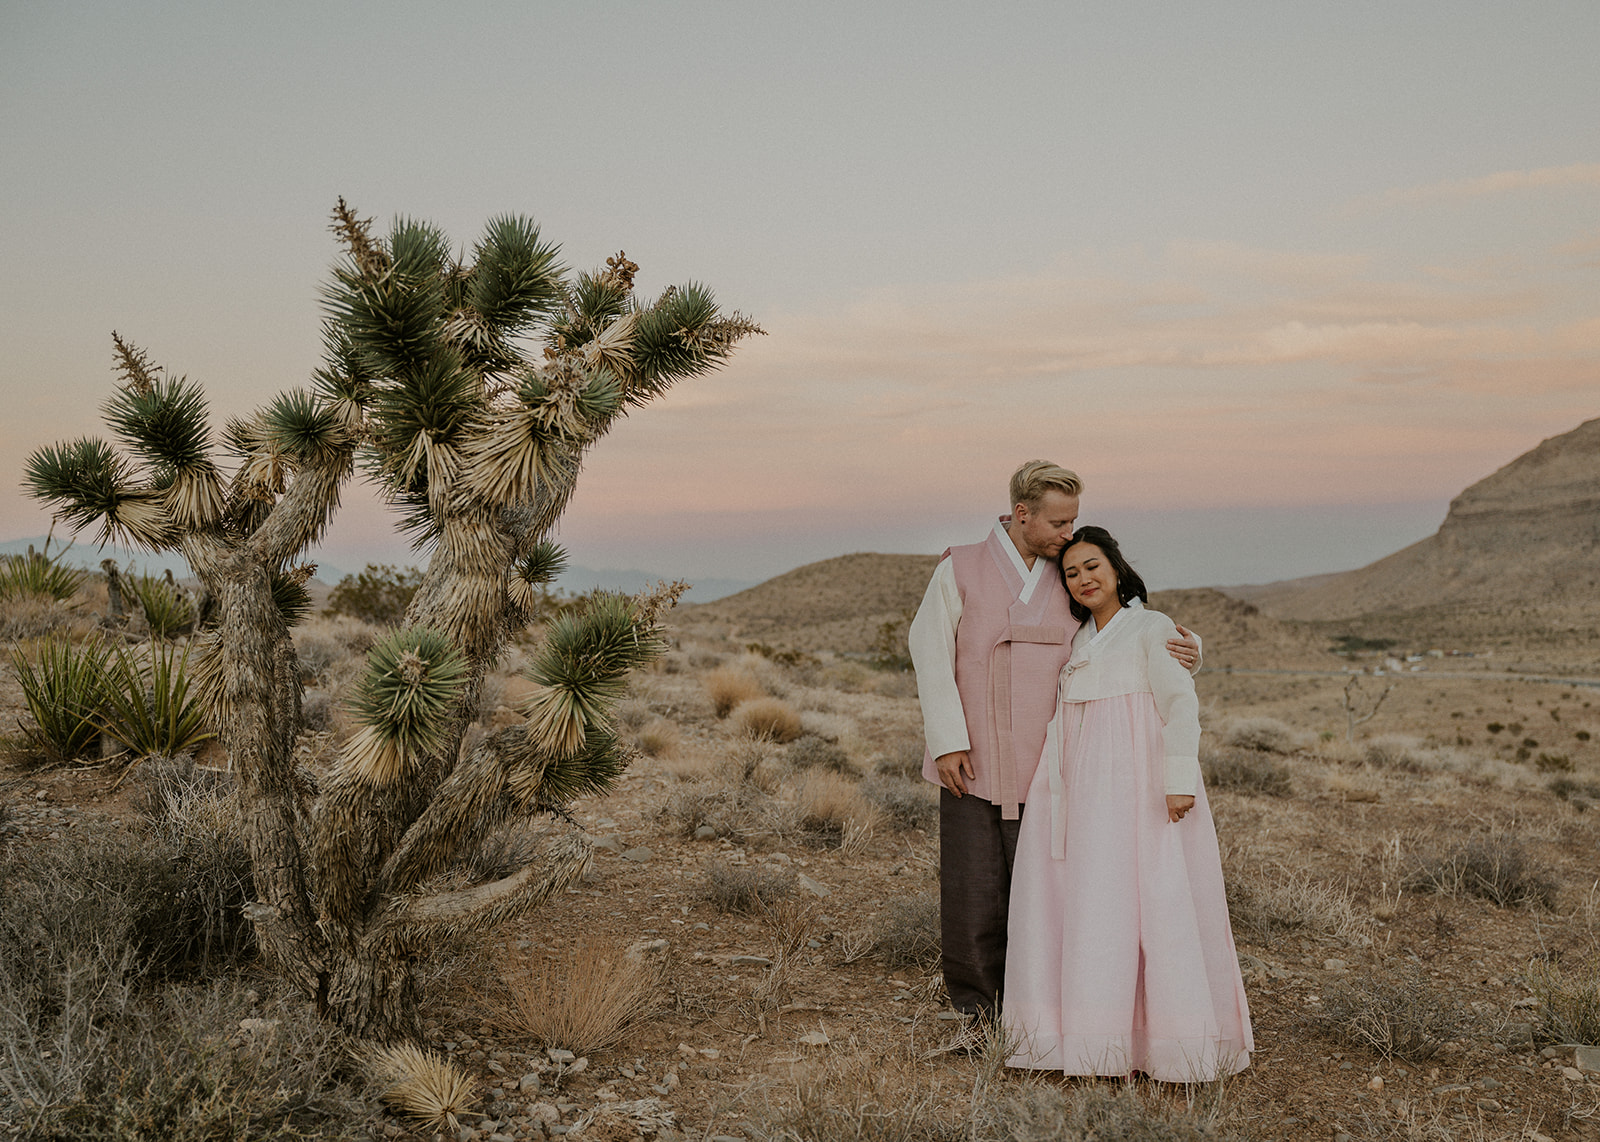 Micro wedding at the Red Rock Canyon Overlook